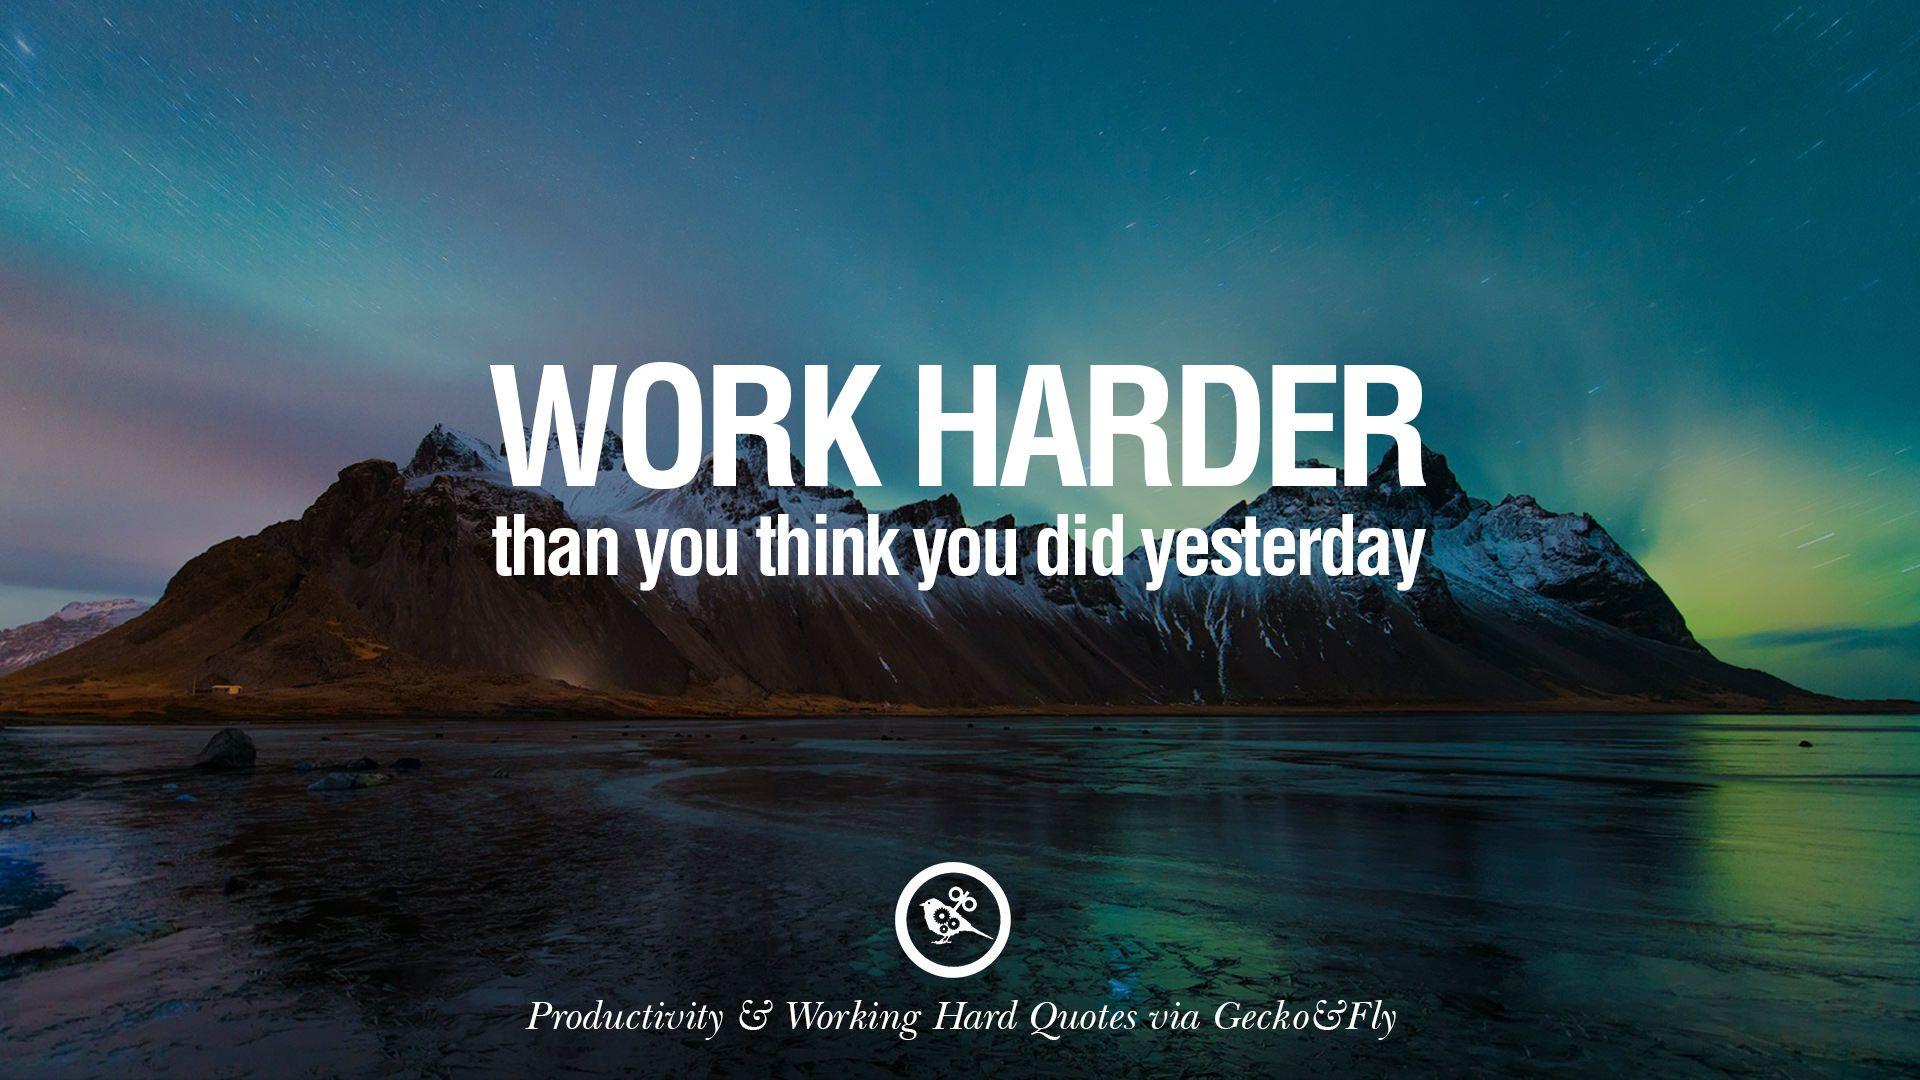 Uplifting Quotes On Increasing Productivity And Working Hard